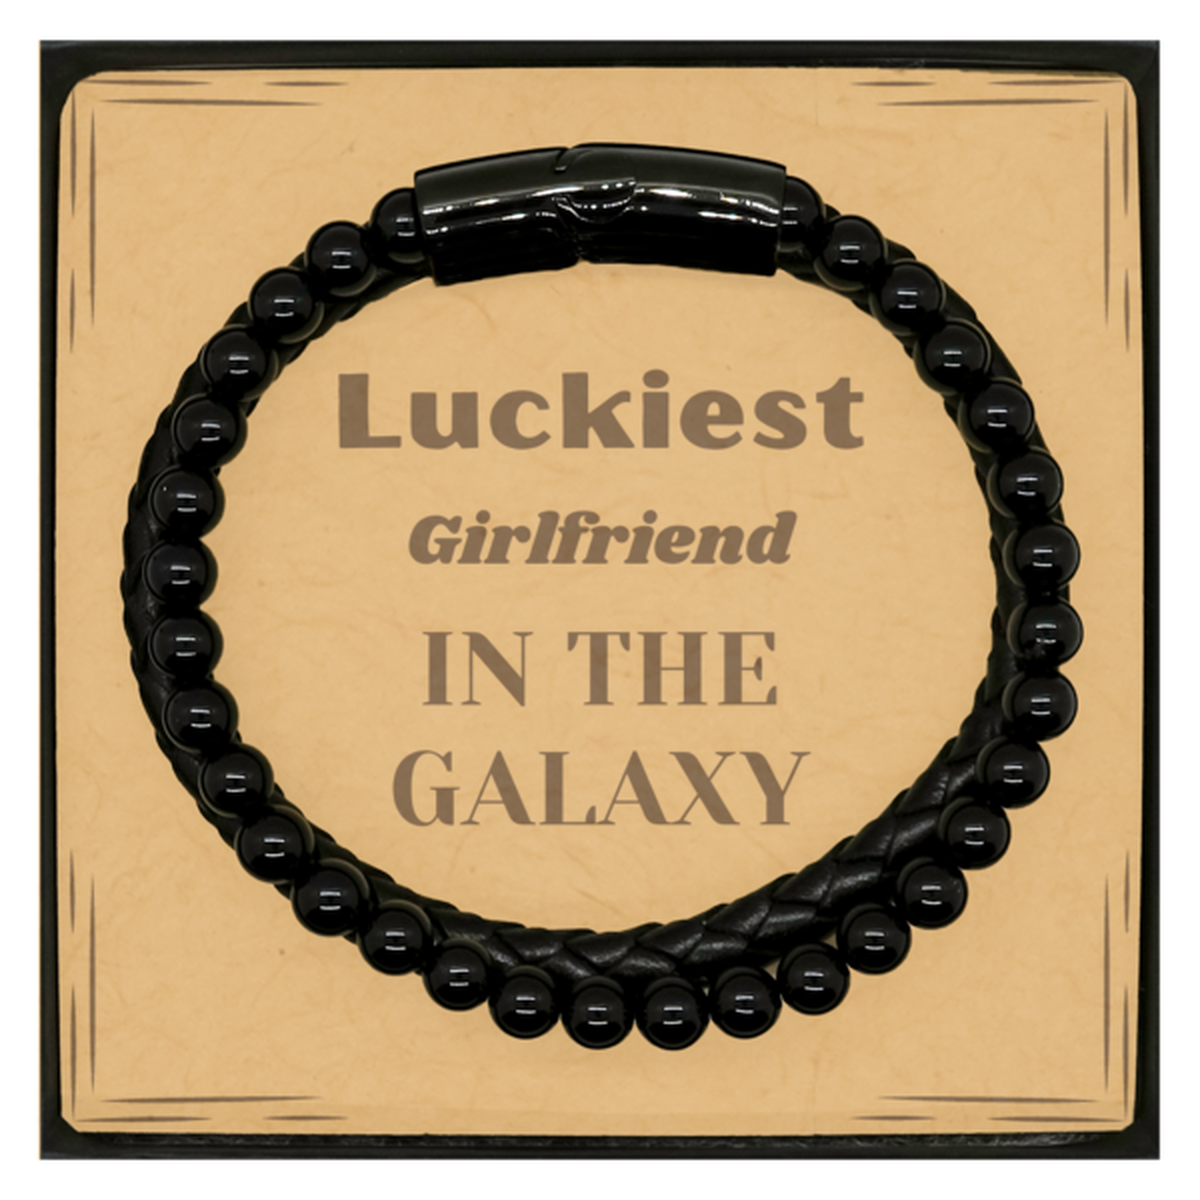 Luckiest Girlfriend in the Galaxy, To My Girlfriend Message Card Gifts, Christmas Girlfriend Stone Leather Bracelets Gifts, X-mas Birthday Unique Gifts For Girlfriend Men Women